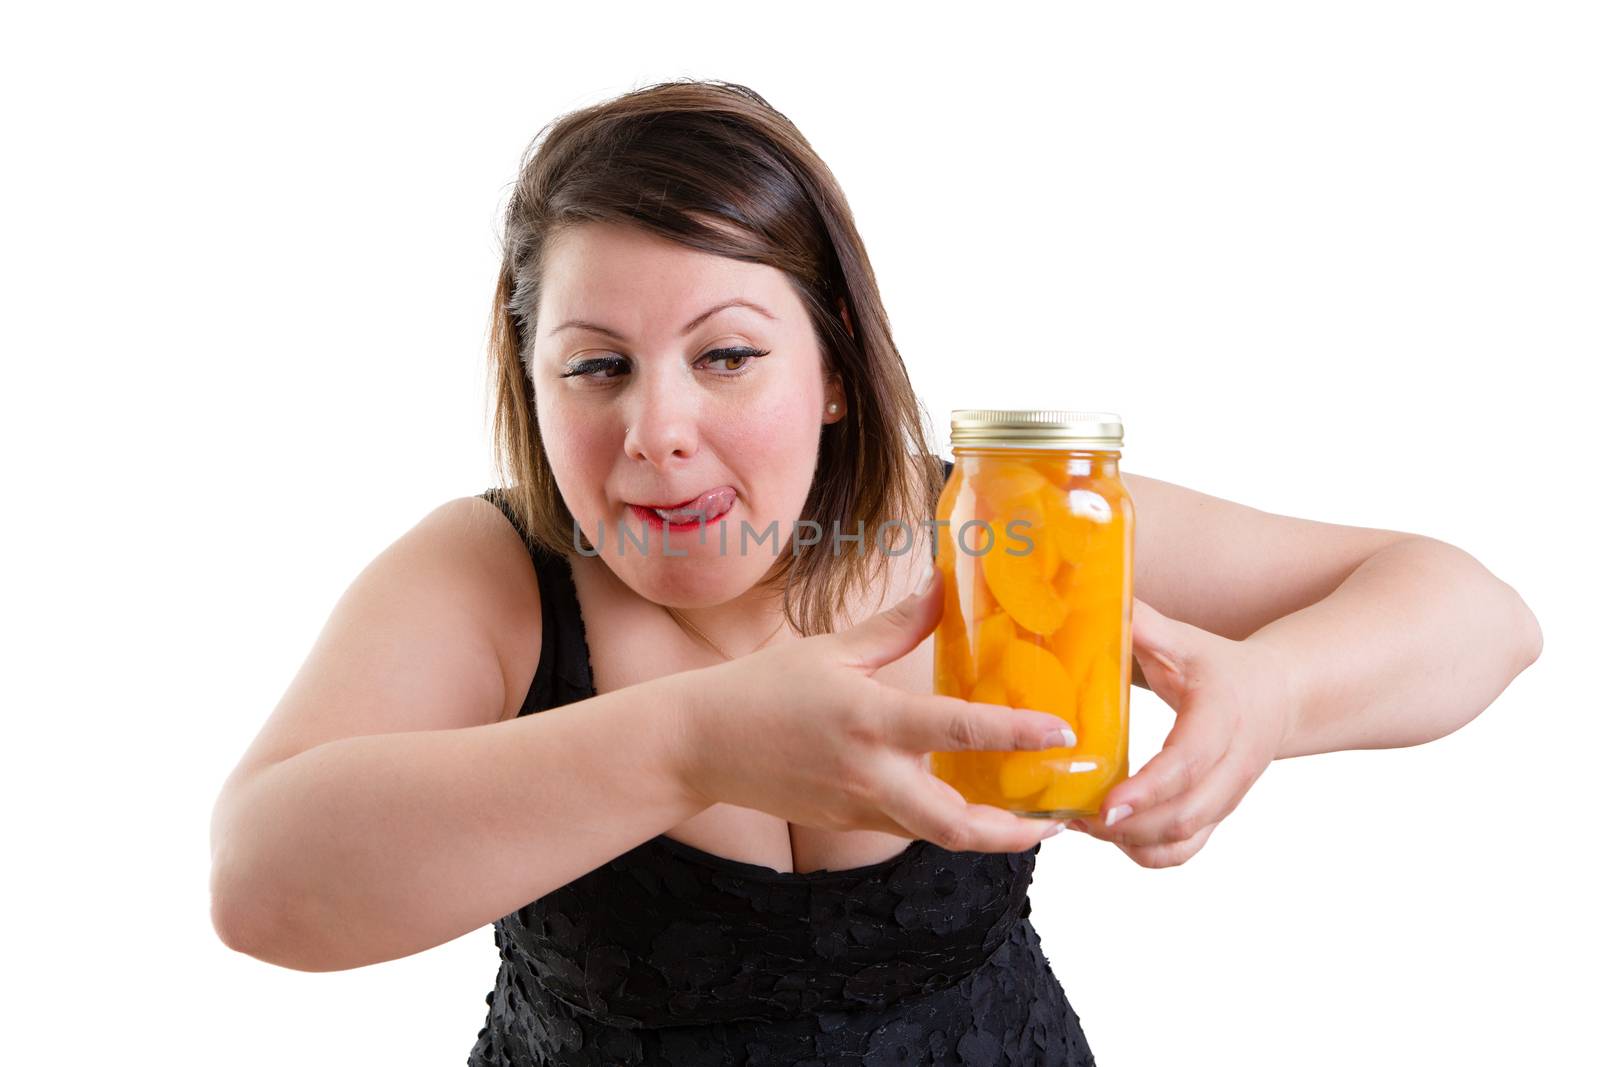 Plump woman licking her lips in anticipation as she eyes a jar of appetizing tempting homemade peaches she is holding in her hand in a health, nutrition and diet concept, isolated on white